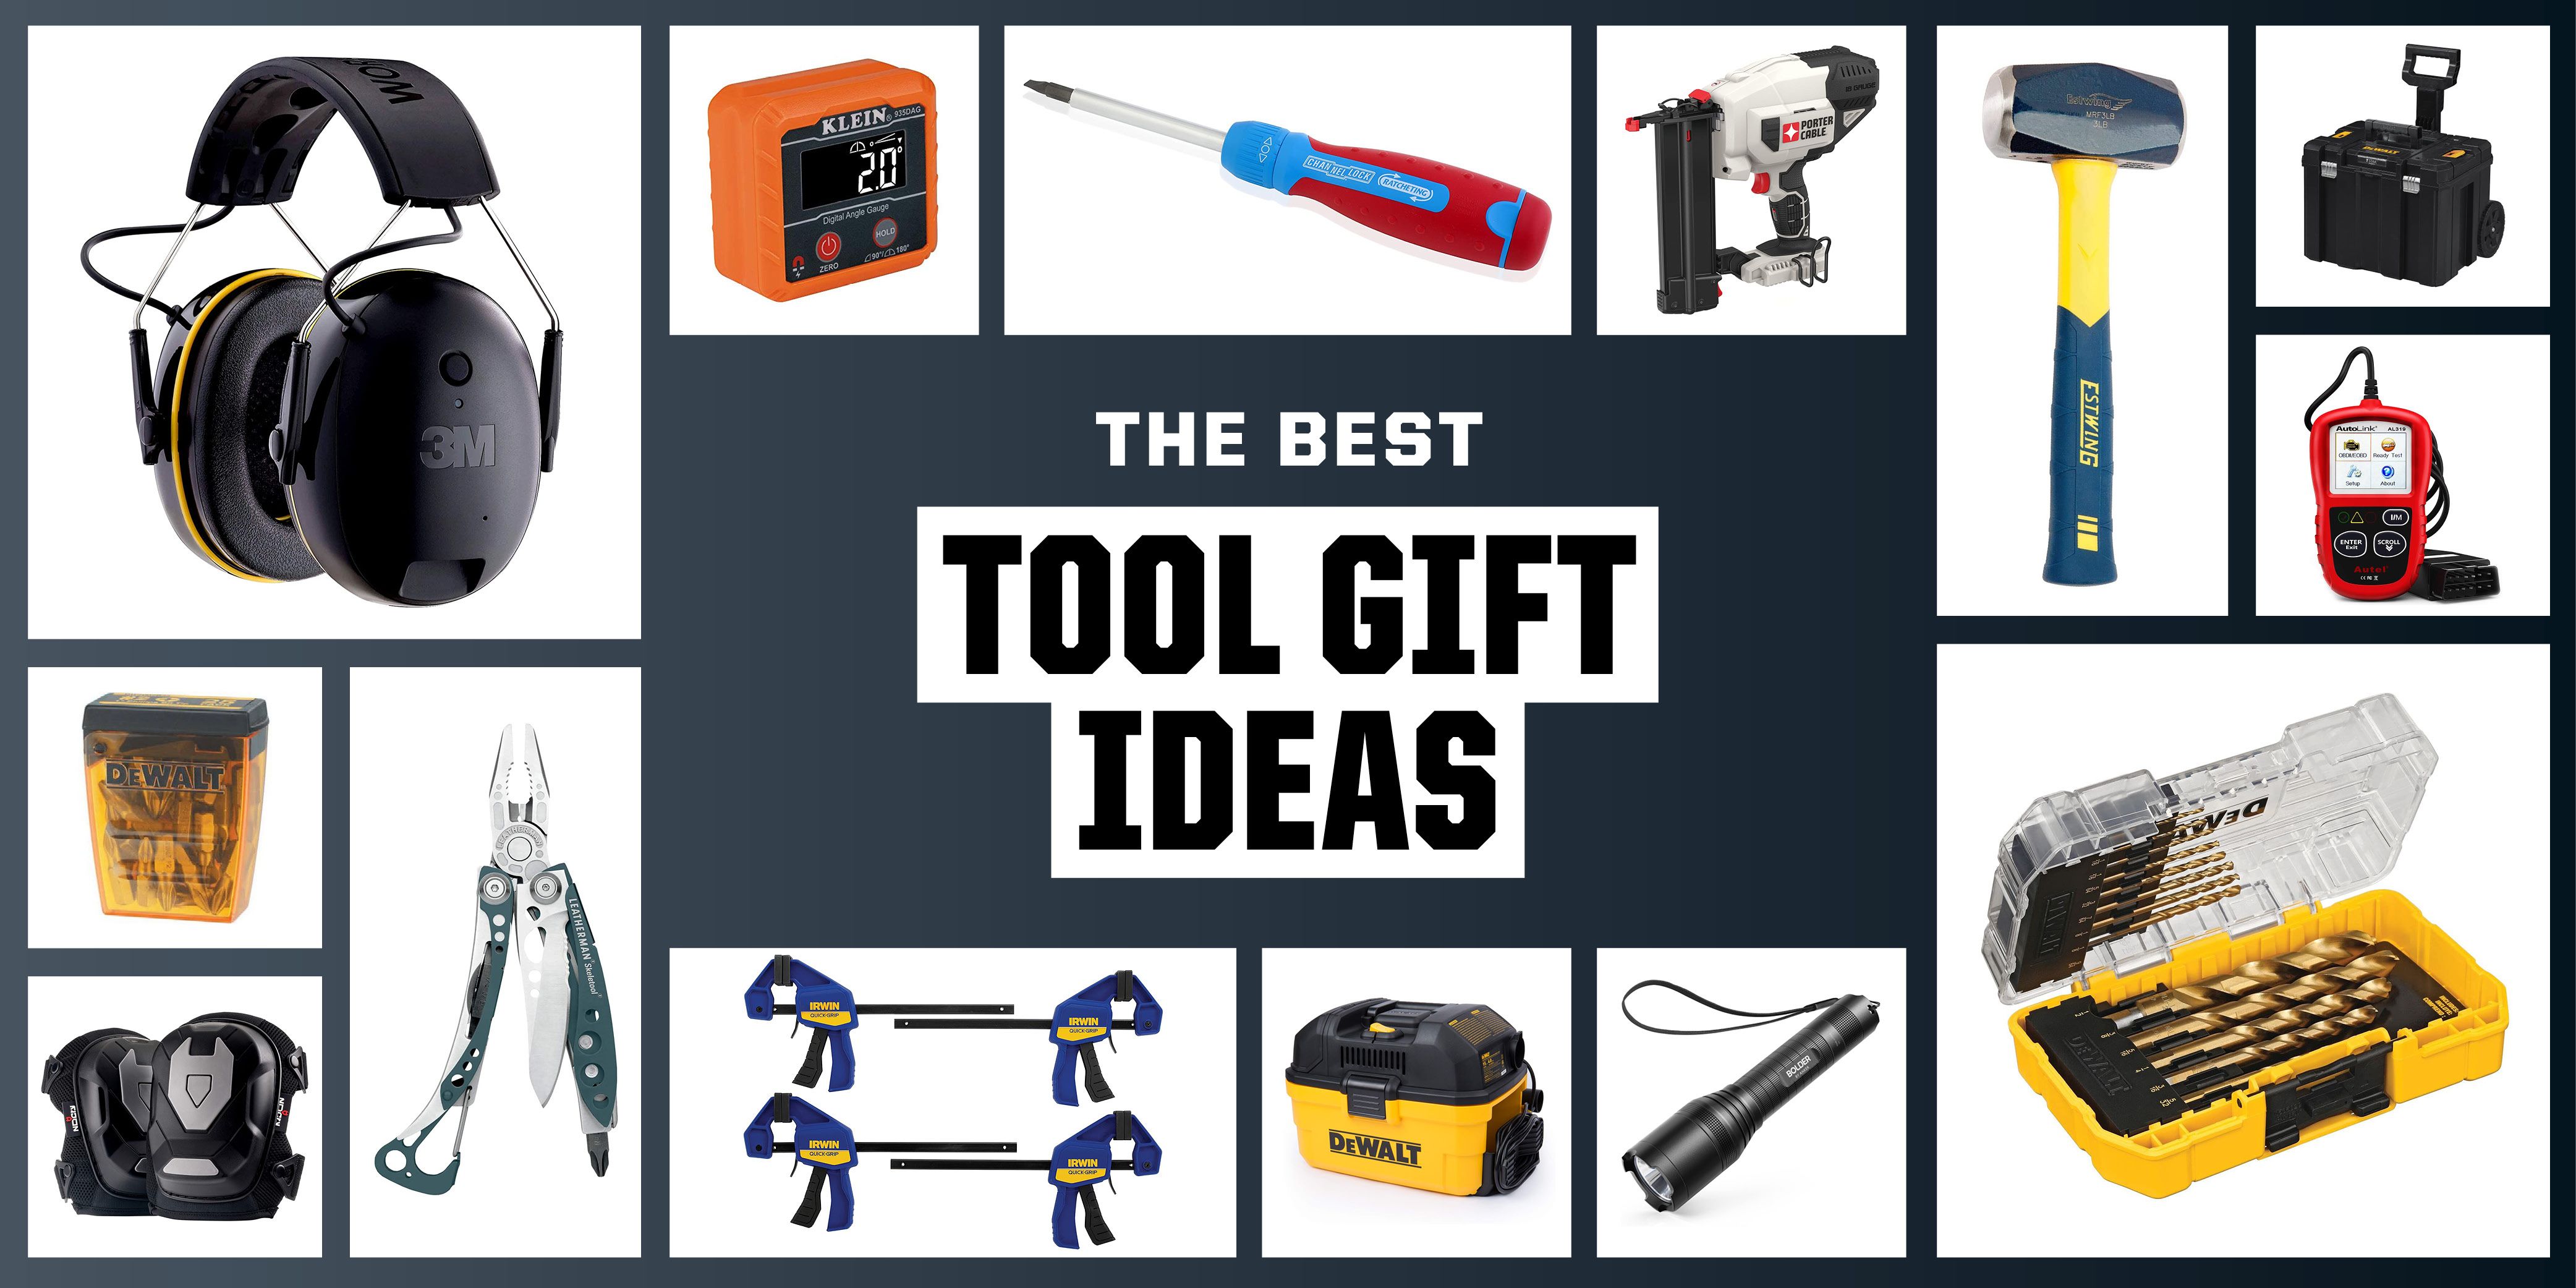 33 Home Improvement and Tool Gift Ideas for Everyone Who Loves to